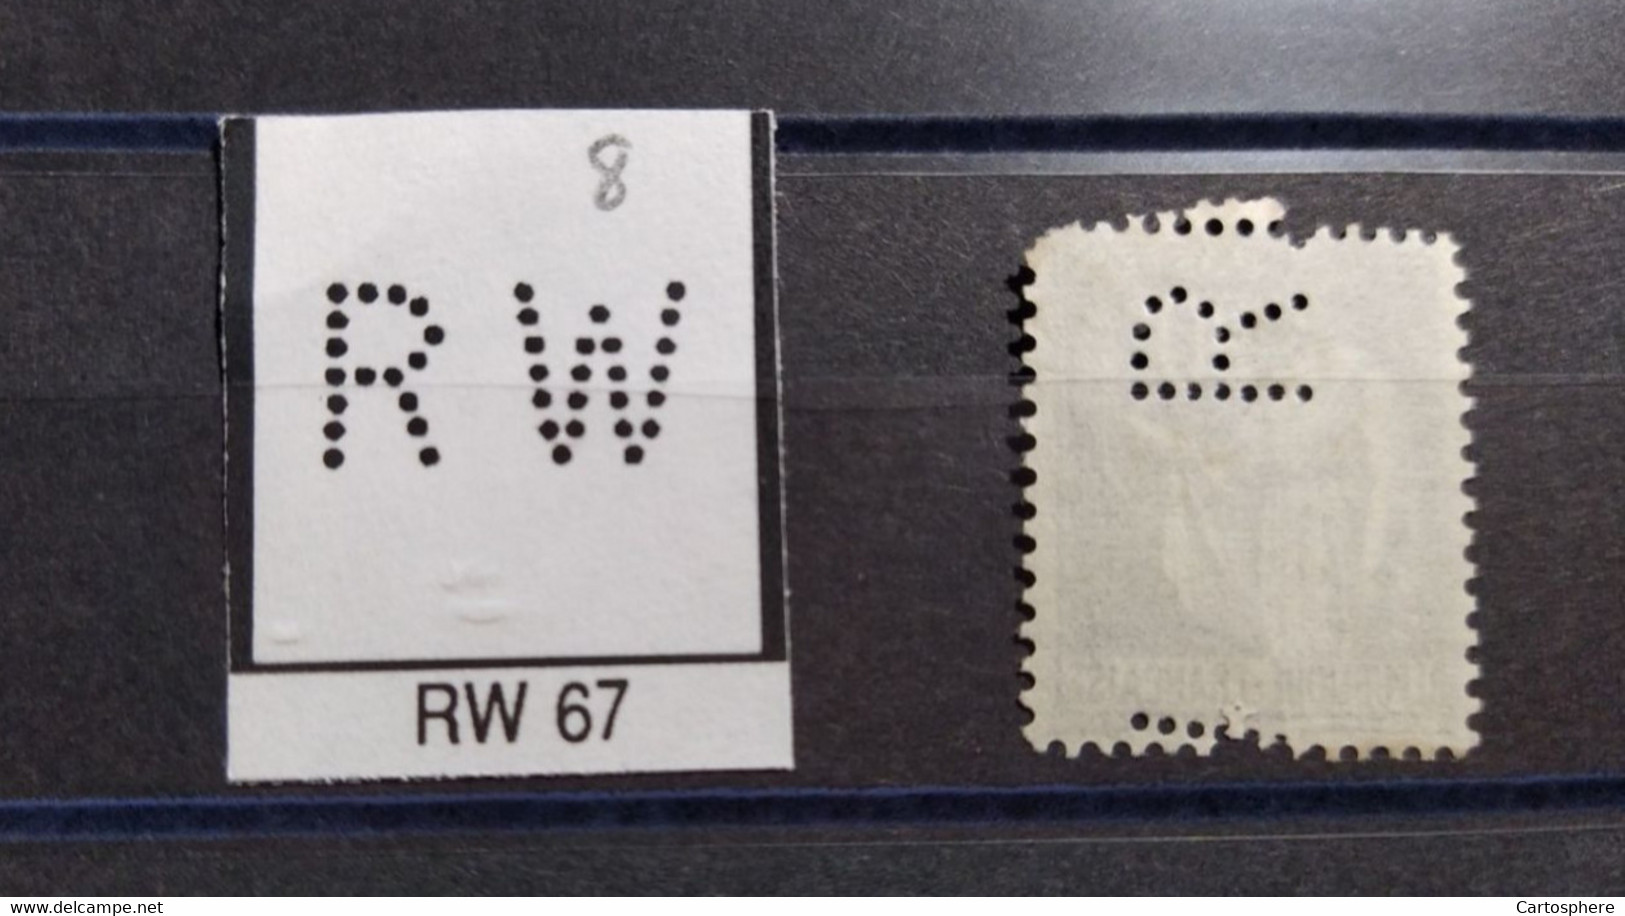 FRANCE TIMBRE RW 67 INDICE 8  SUR PAIX  PERFORE PERFORES PERFIN PERFINS PERFO PERFORATION PERFORIERT - Gebraucht